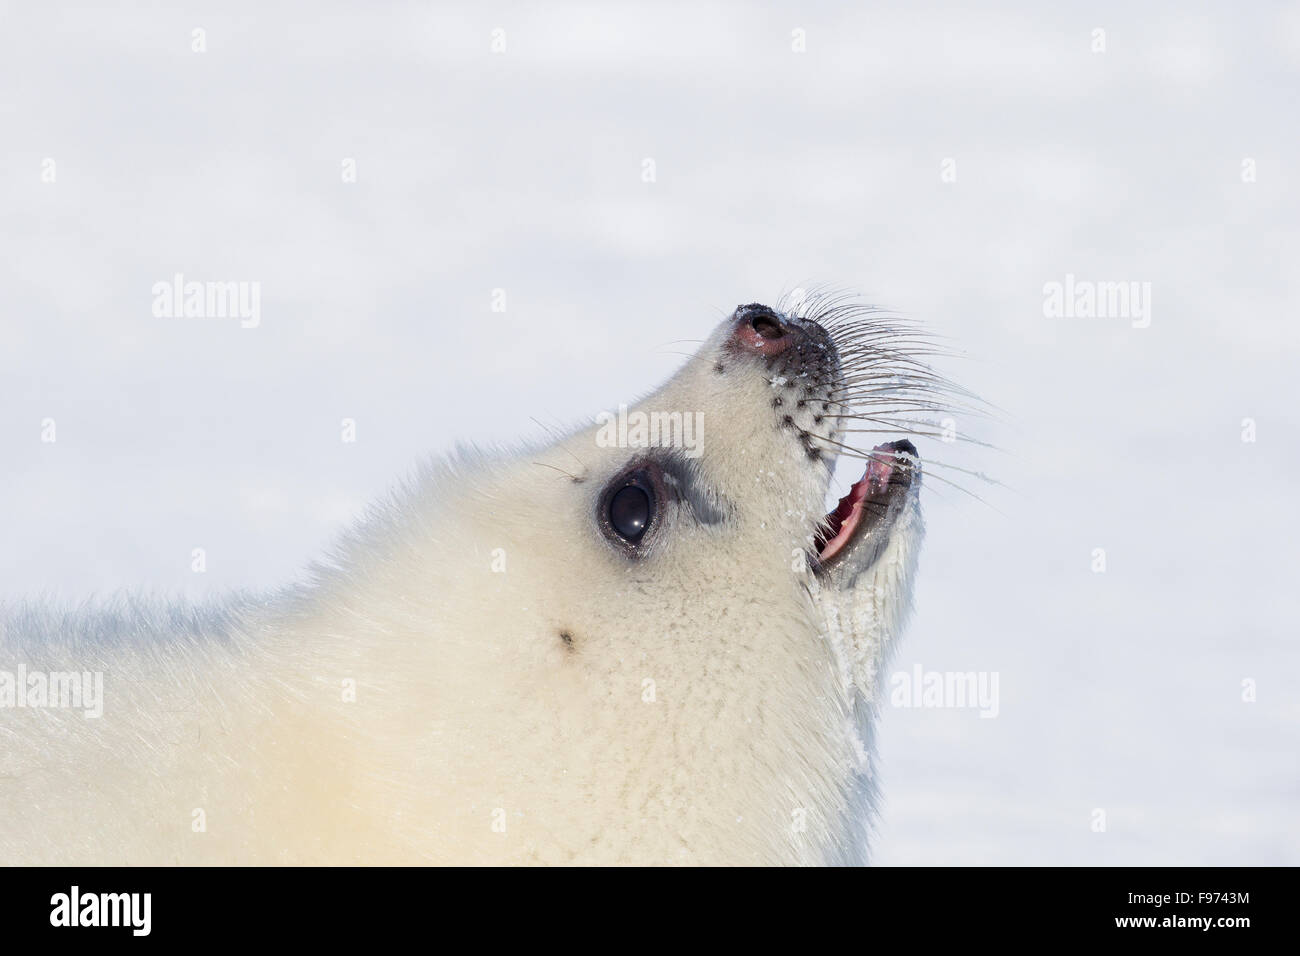 Harp seal (Pagophilus groenlandicus), whitecoat pup vocalizing, on sea ice, Gulf of St. Lawrence, near Îles de la Madeleine Stock Photo